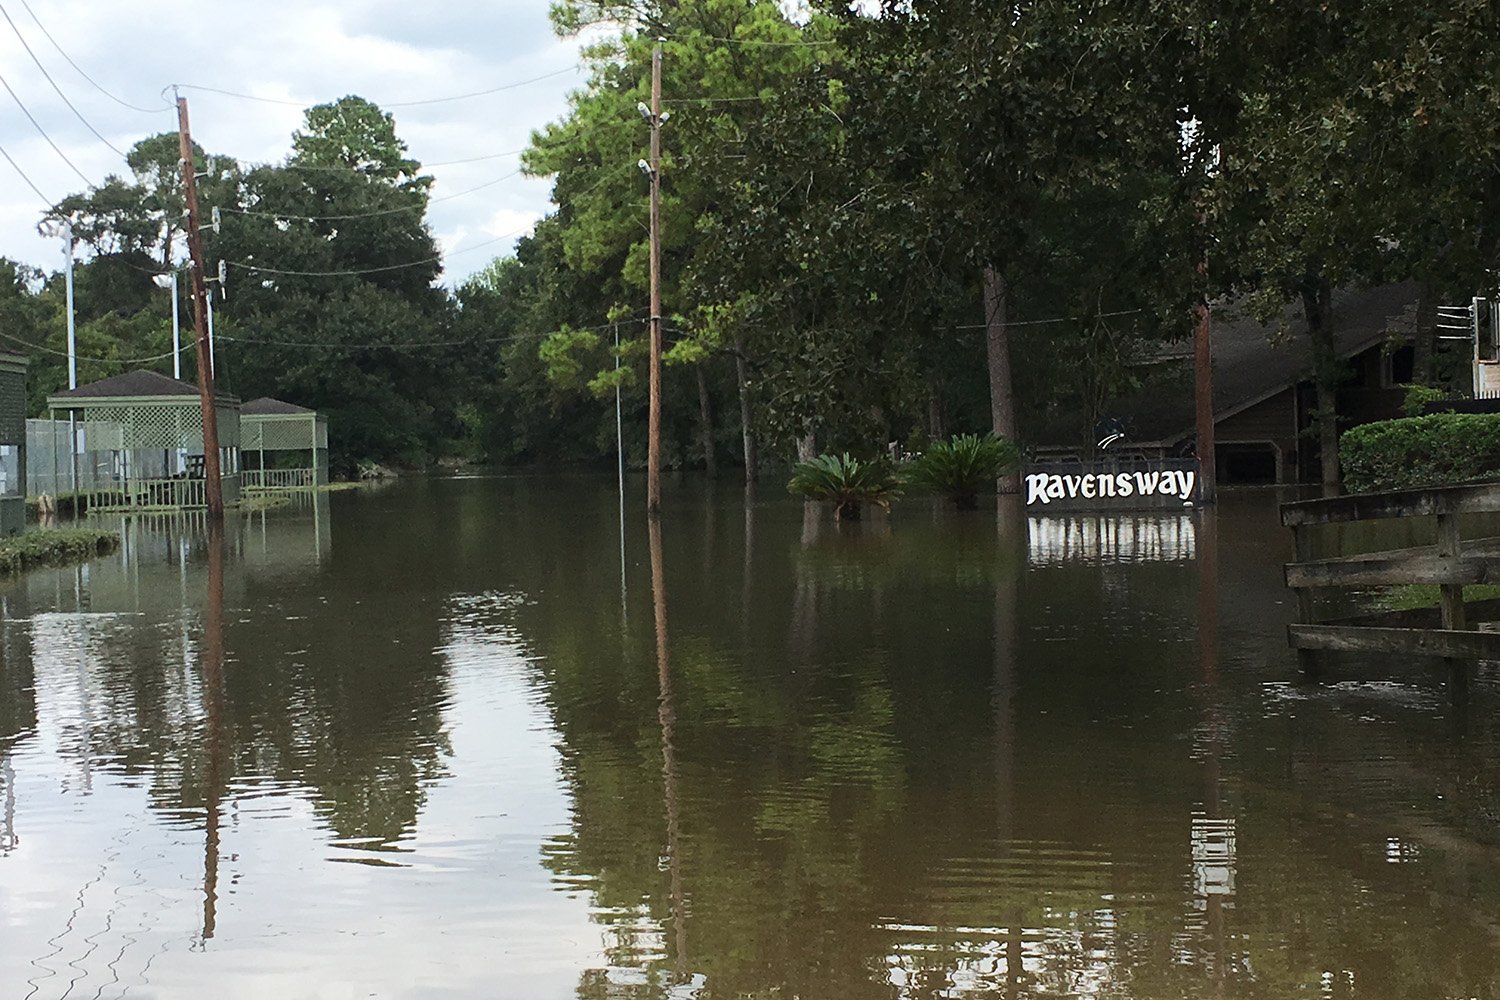 The Ravensway subdivision in Cypress near Houston where Dick Smith lives on Aug. 30, 2017, following Hurricane Harvey.